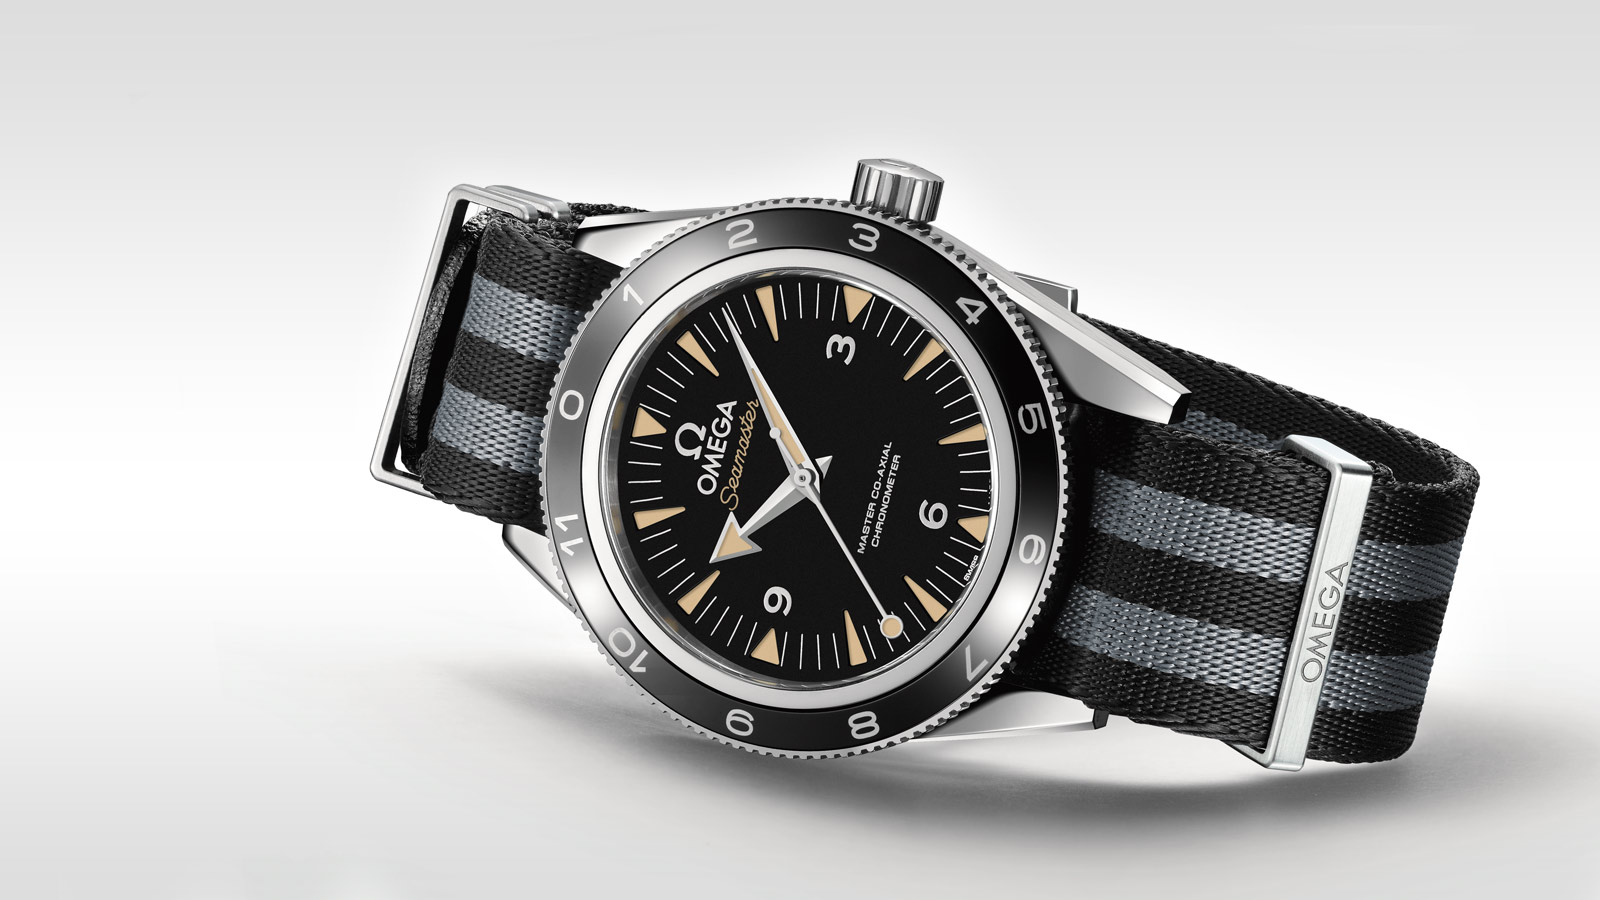 Cheap OMEGA Seamaster 300 Spectre Limited Replica Watches With Co-Axial Movements